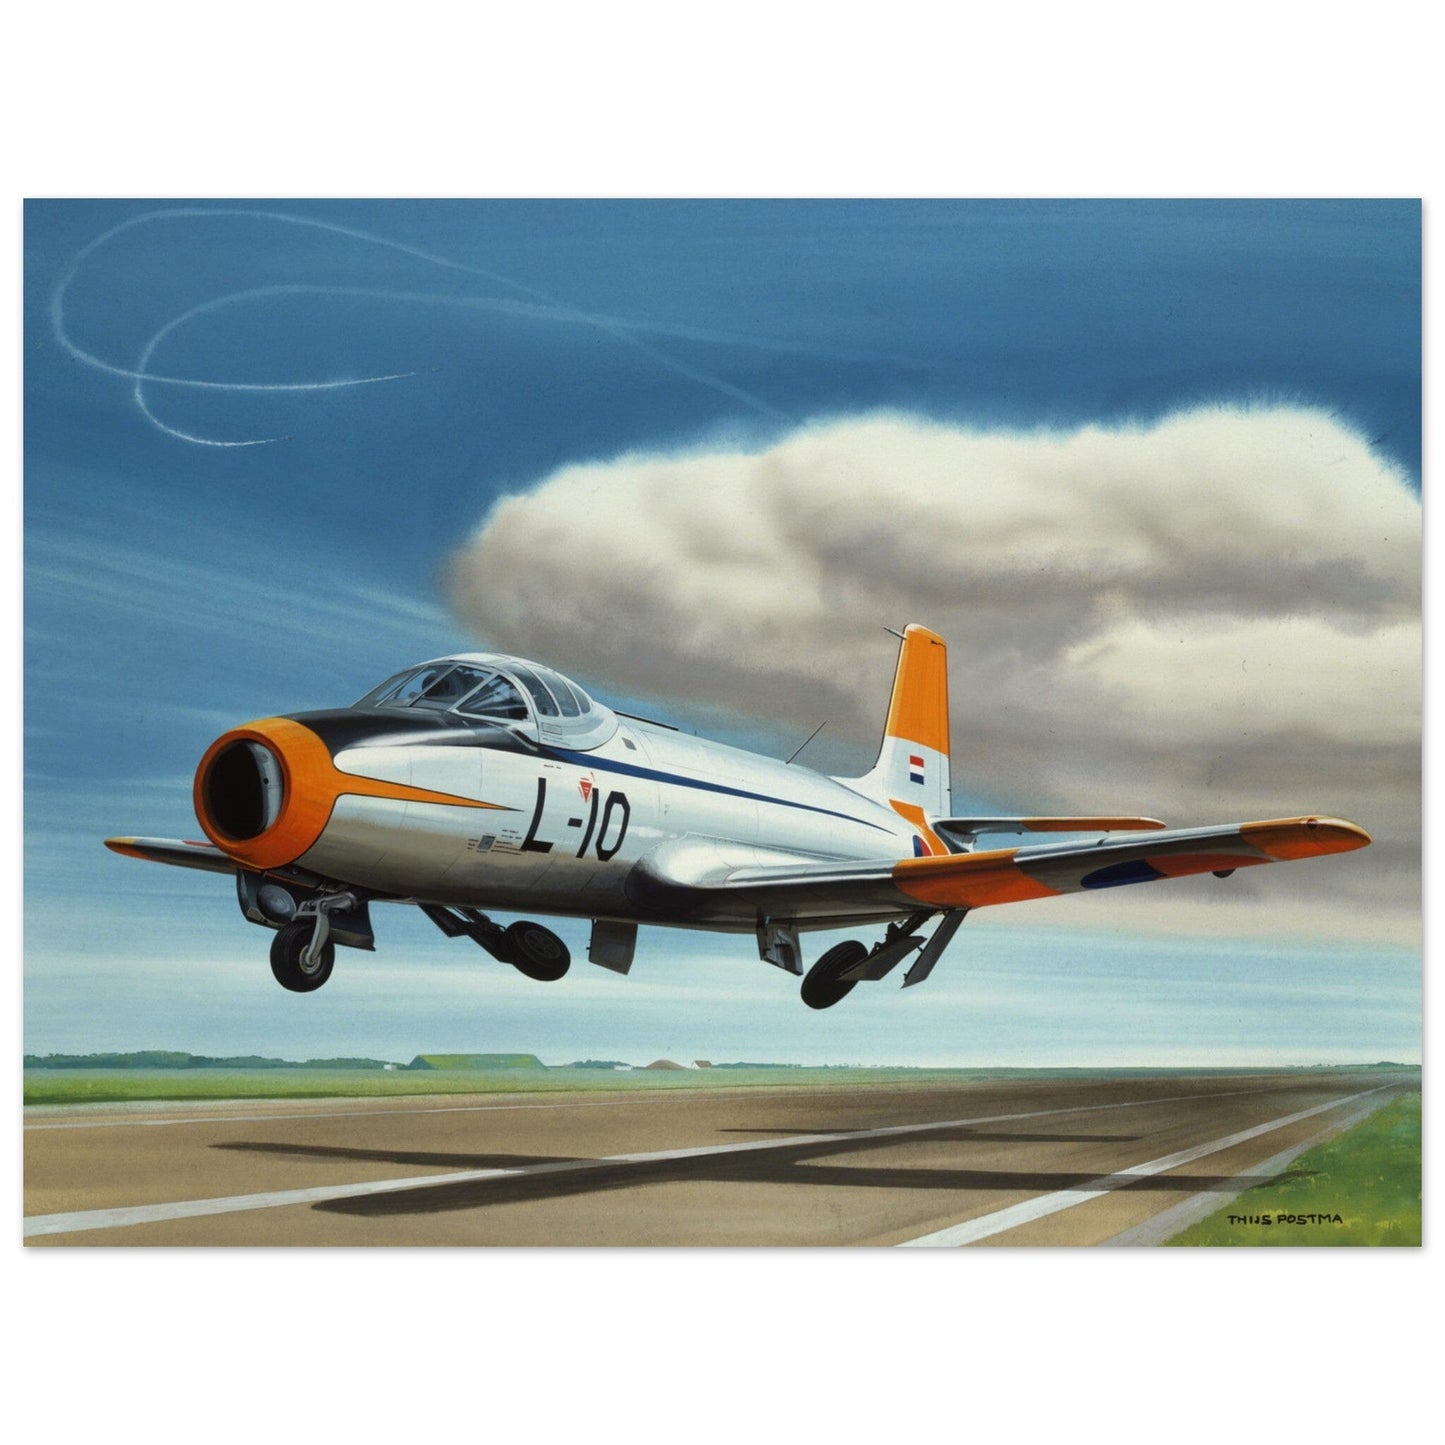 Thijs Postma - Poster - Fokker S-14 Mach Trainer Poster Only TP Aviation Art 60x80 cm / 24x32″ 